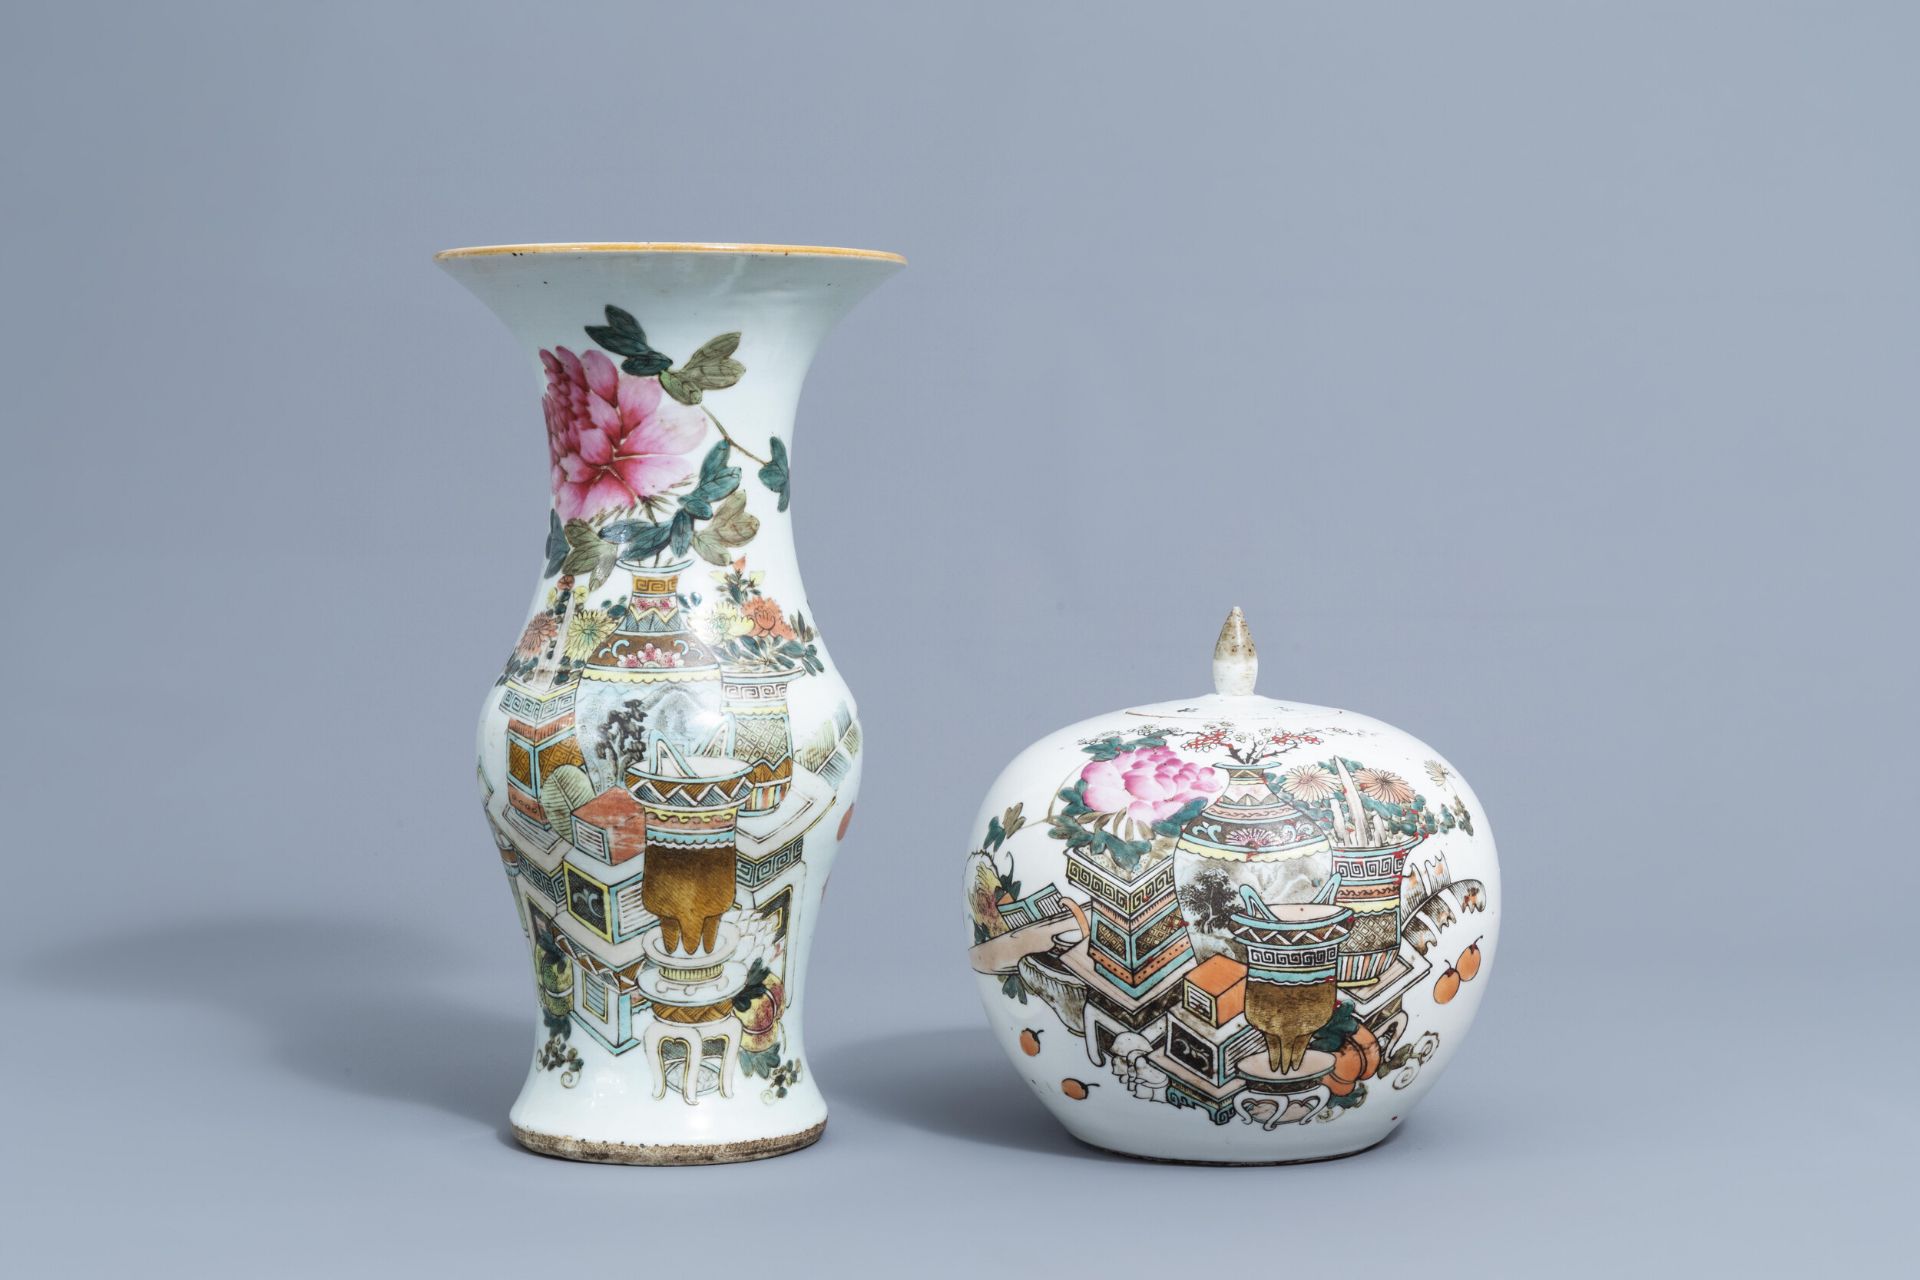 A Chinese qianjiang cai yenyen vase and a jar and cover with antiquites design, 19th/20th C.